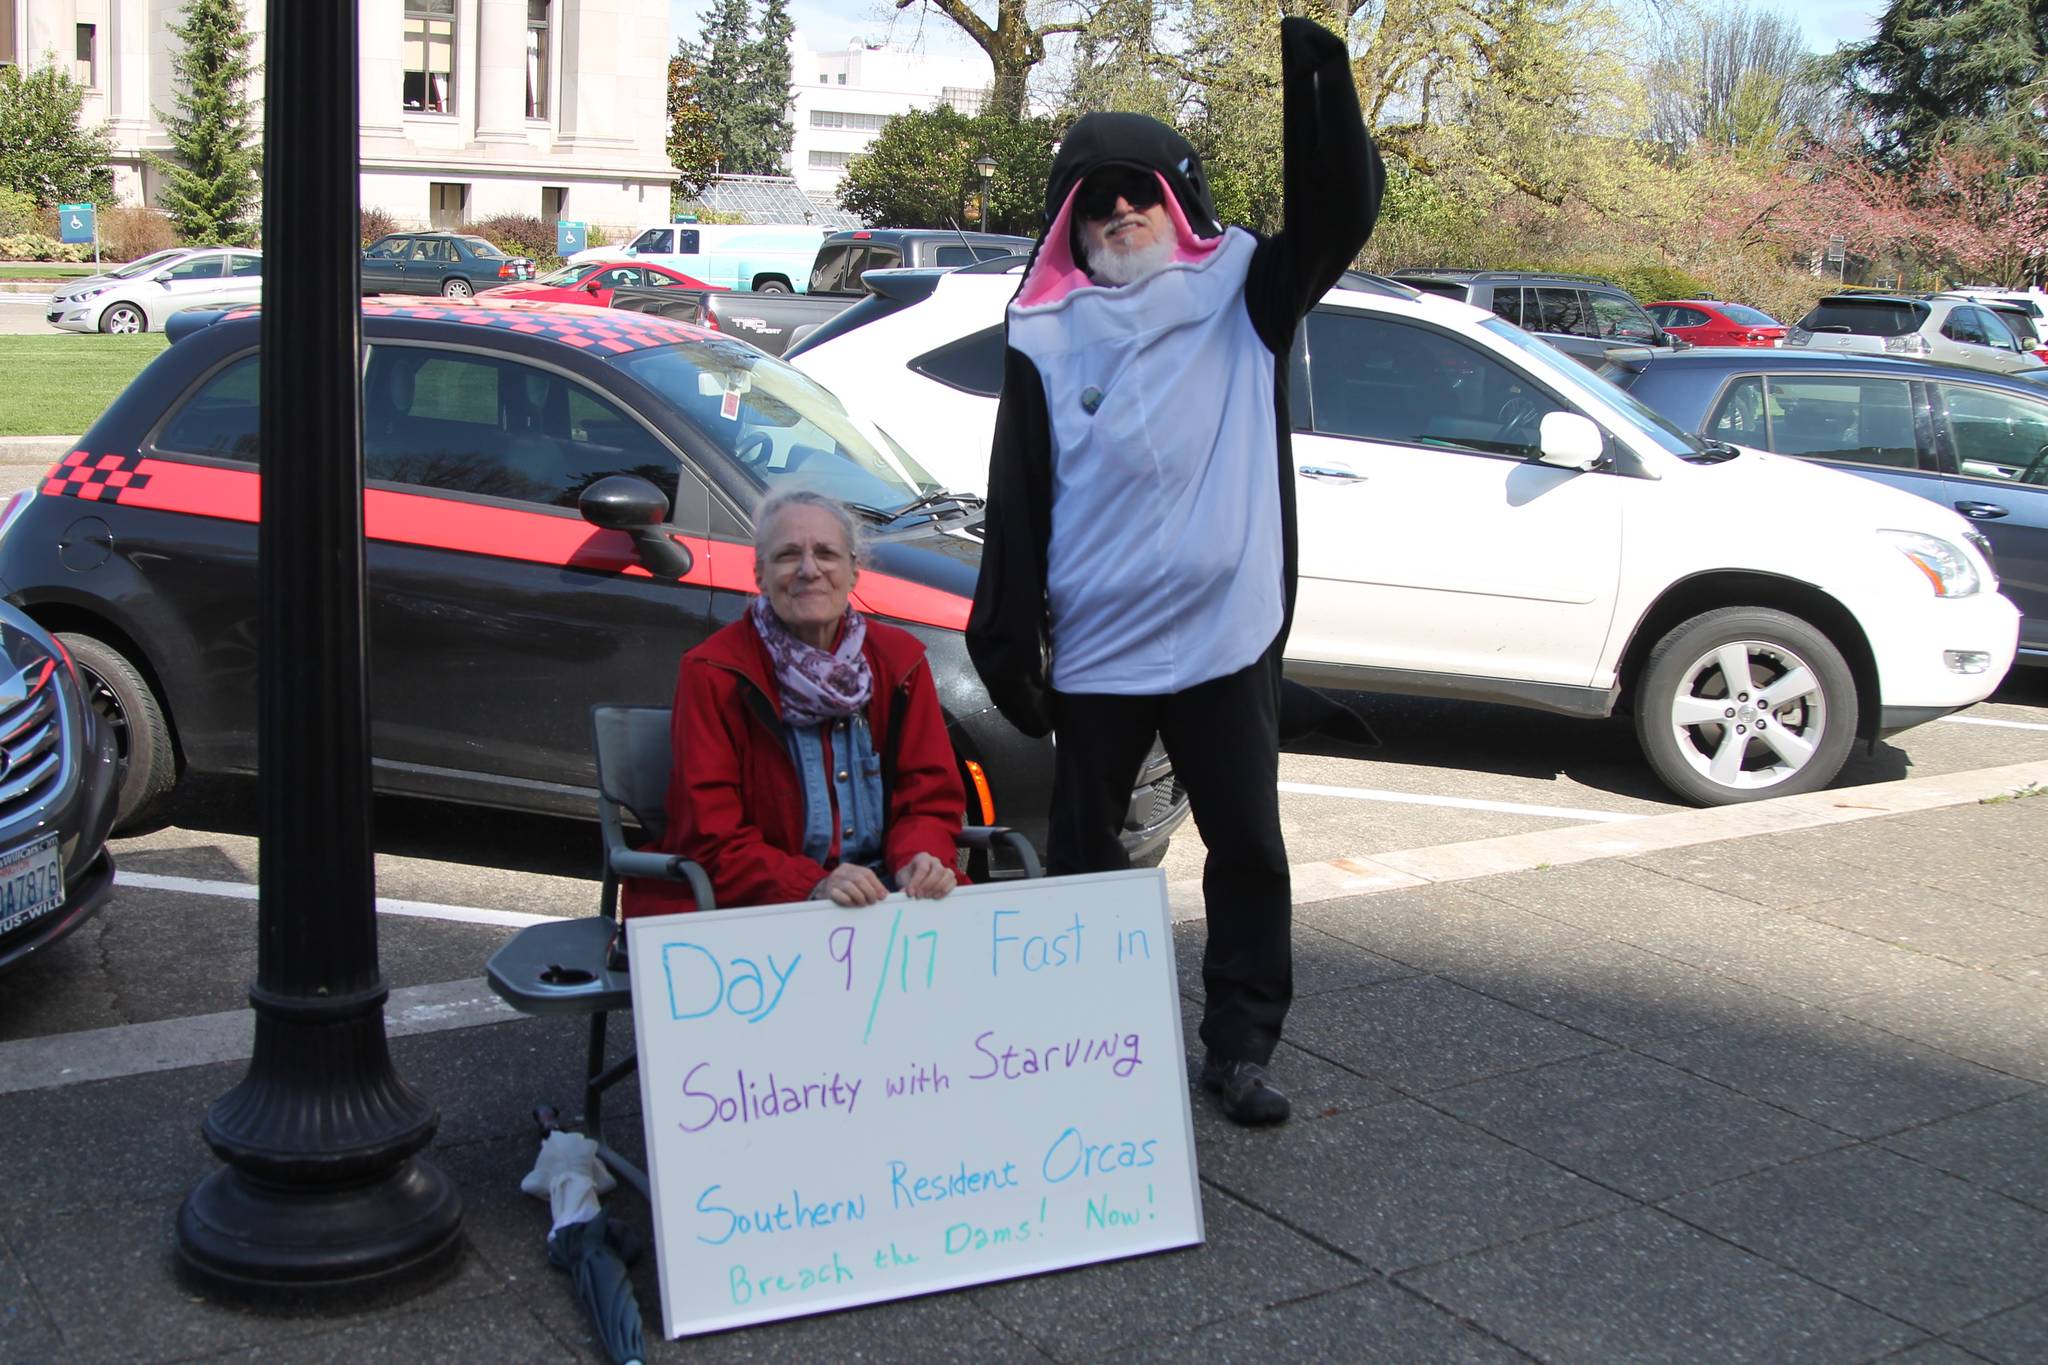 Contributed photo                                Lanni Johnson sitting in front of the capitol building steps where she has been on a hunger strike for the last 9 days to save the Southern Resident Orcas. Johnson is joined by supporter, Phil Myers, who can be seen in an orca onesie.